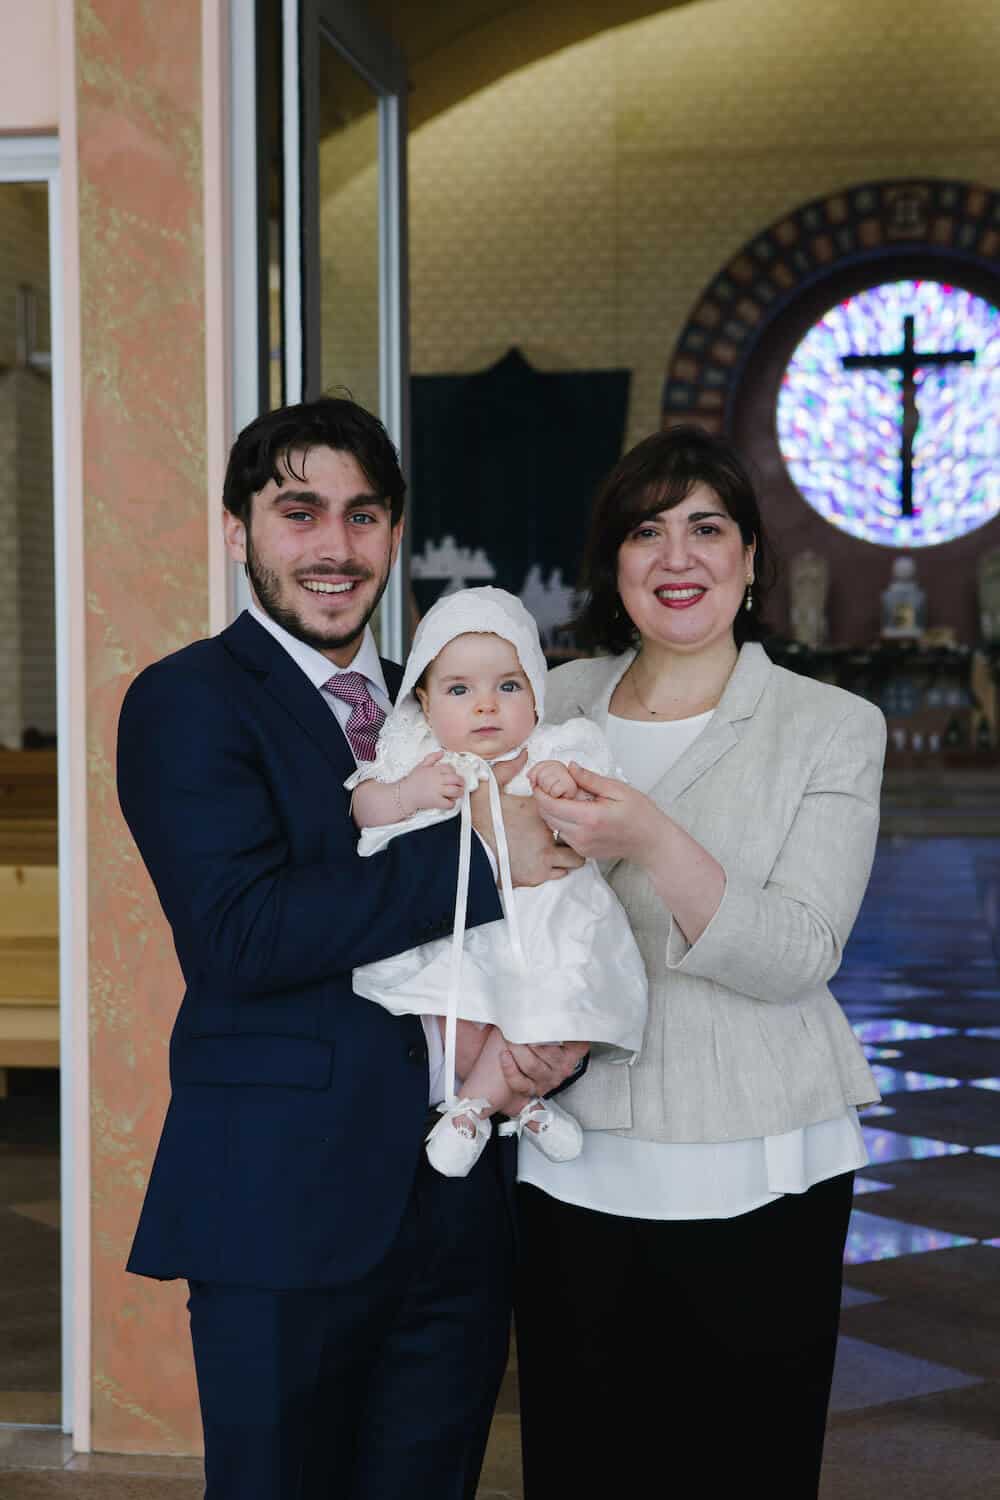 Baptism Photography Near Me Christening Photographer Melbourne Baby Celebrations Our Lady of Lebanon Church of Melbourne Helena 12